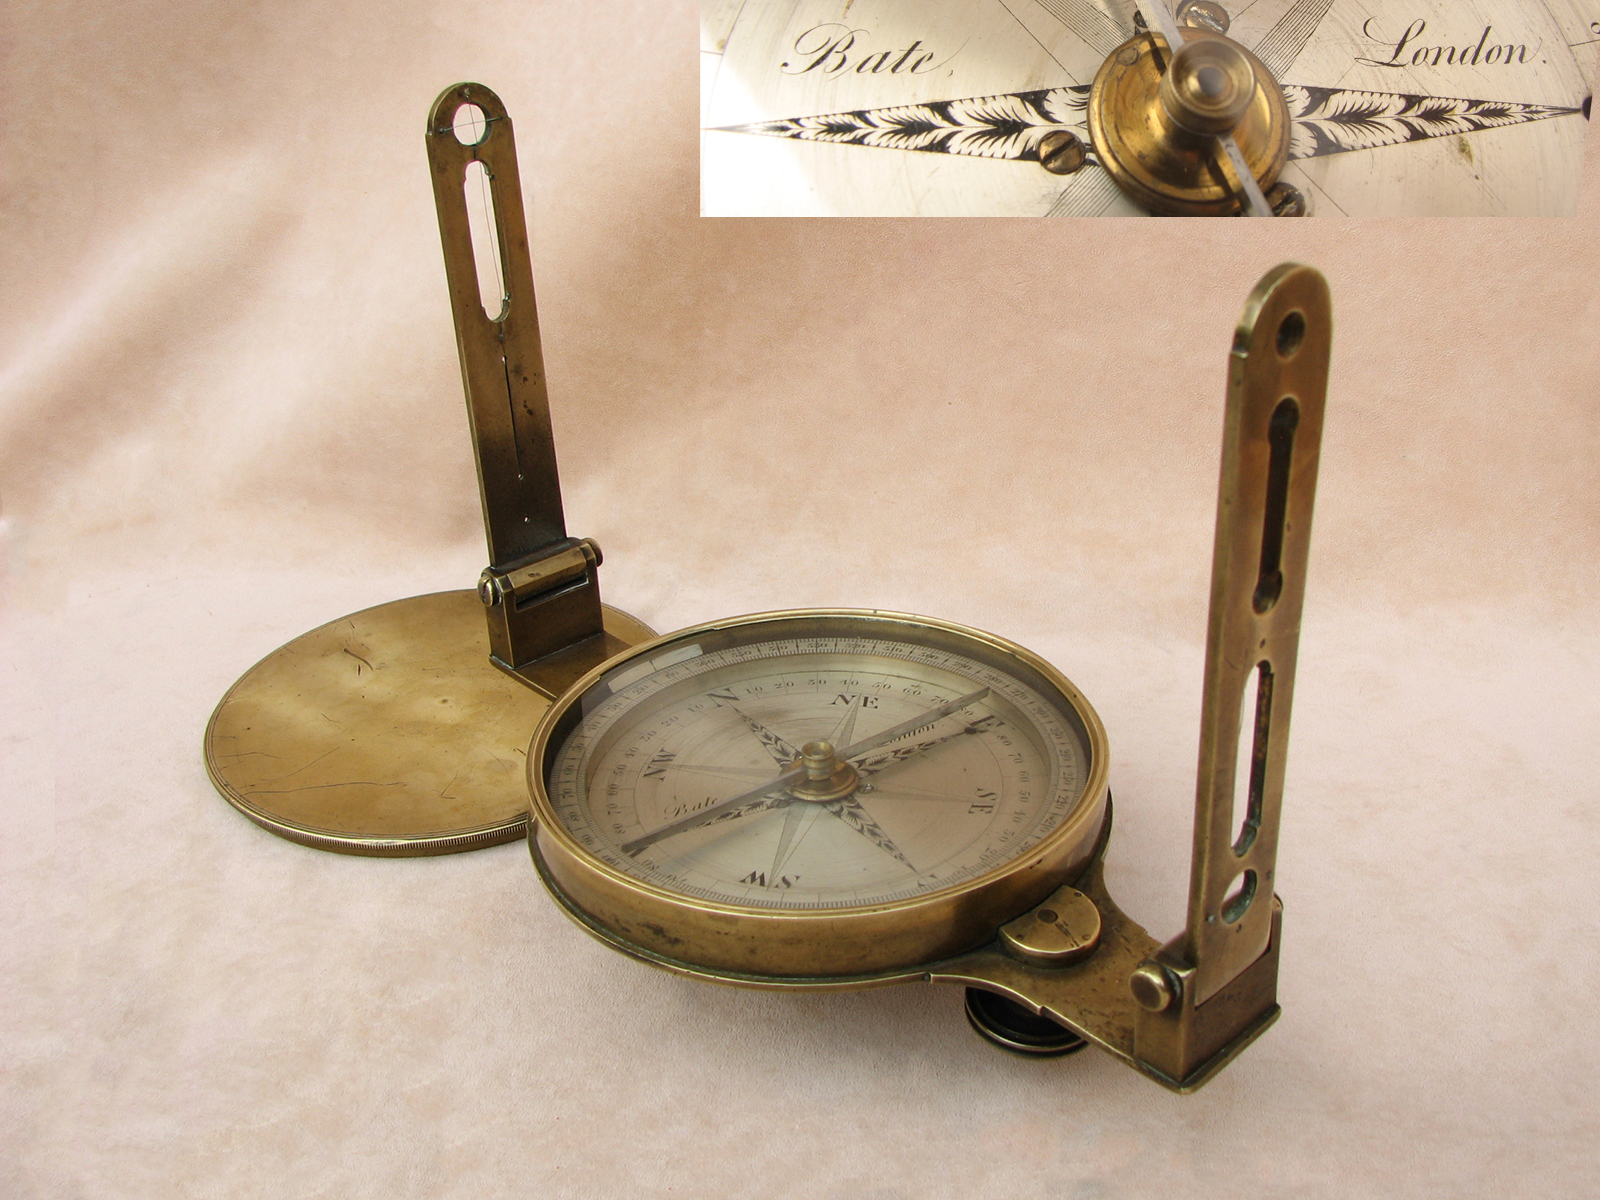 Early 19th century Surveyors compass signed Bate London